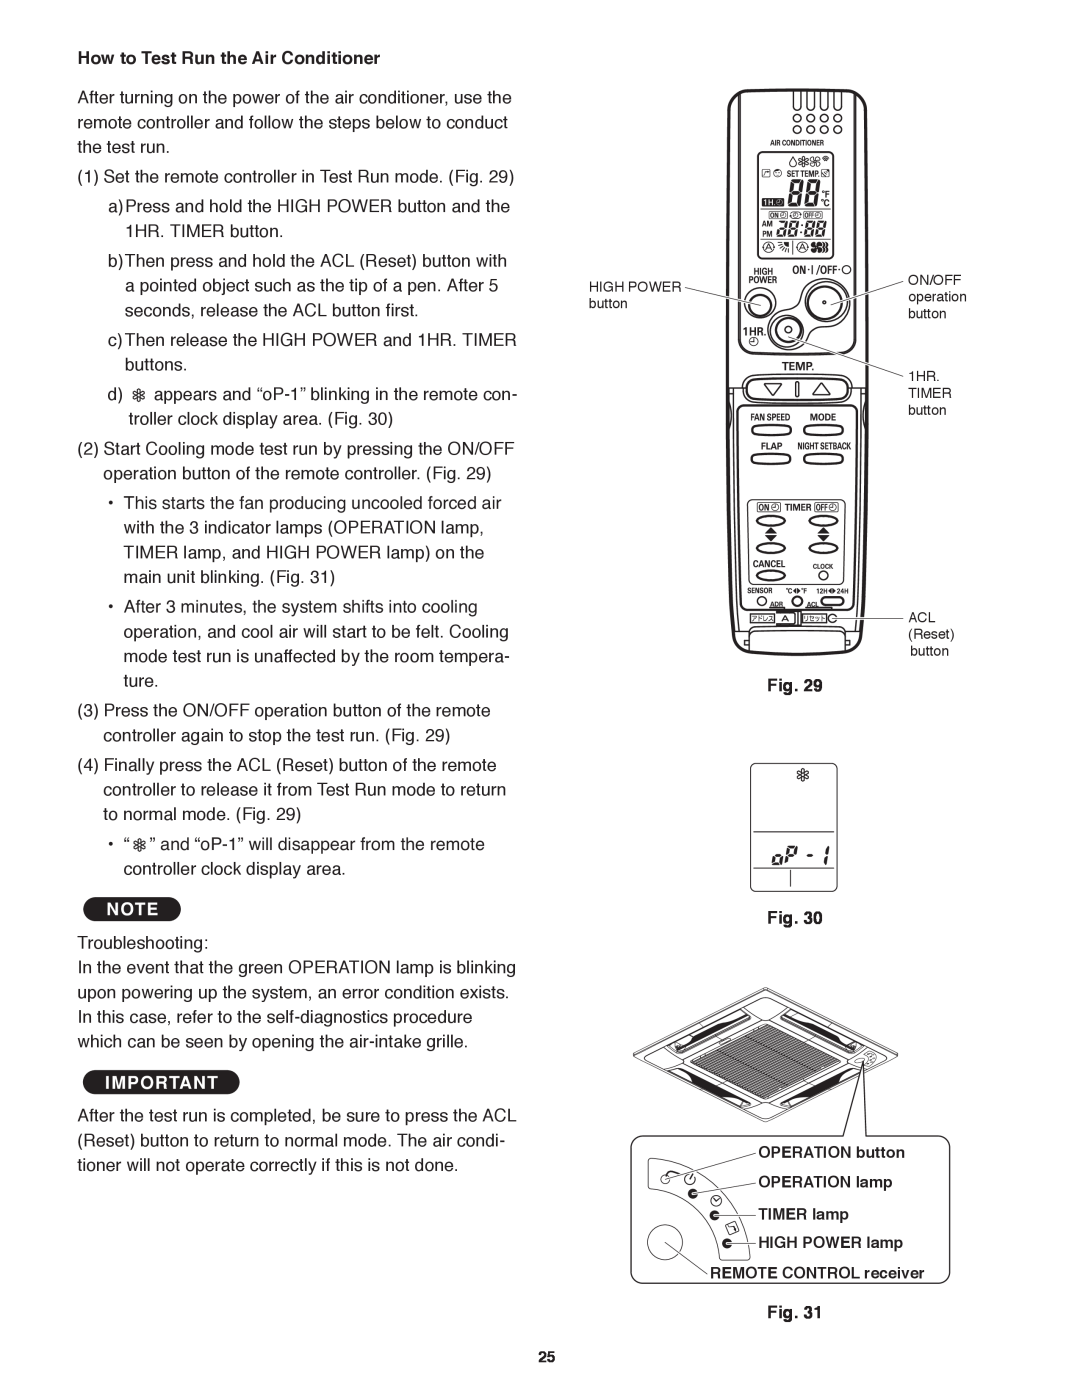 Panasonic CU-KS12NK1A, CU-KS18NKUA, CS-KS12NB41 & CZ-18BT1U service manual How to Test Run the Air Conditioner, Fig. Fig 